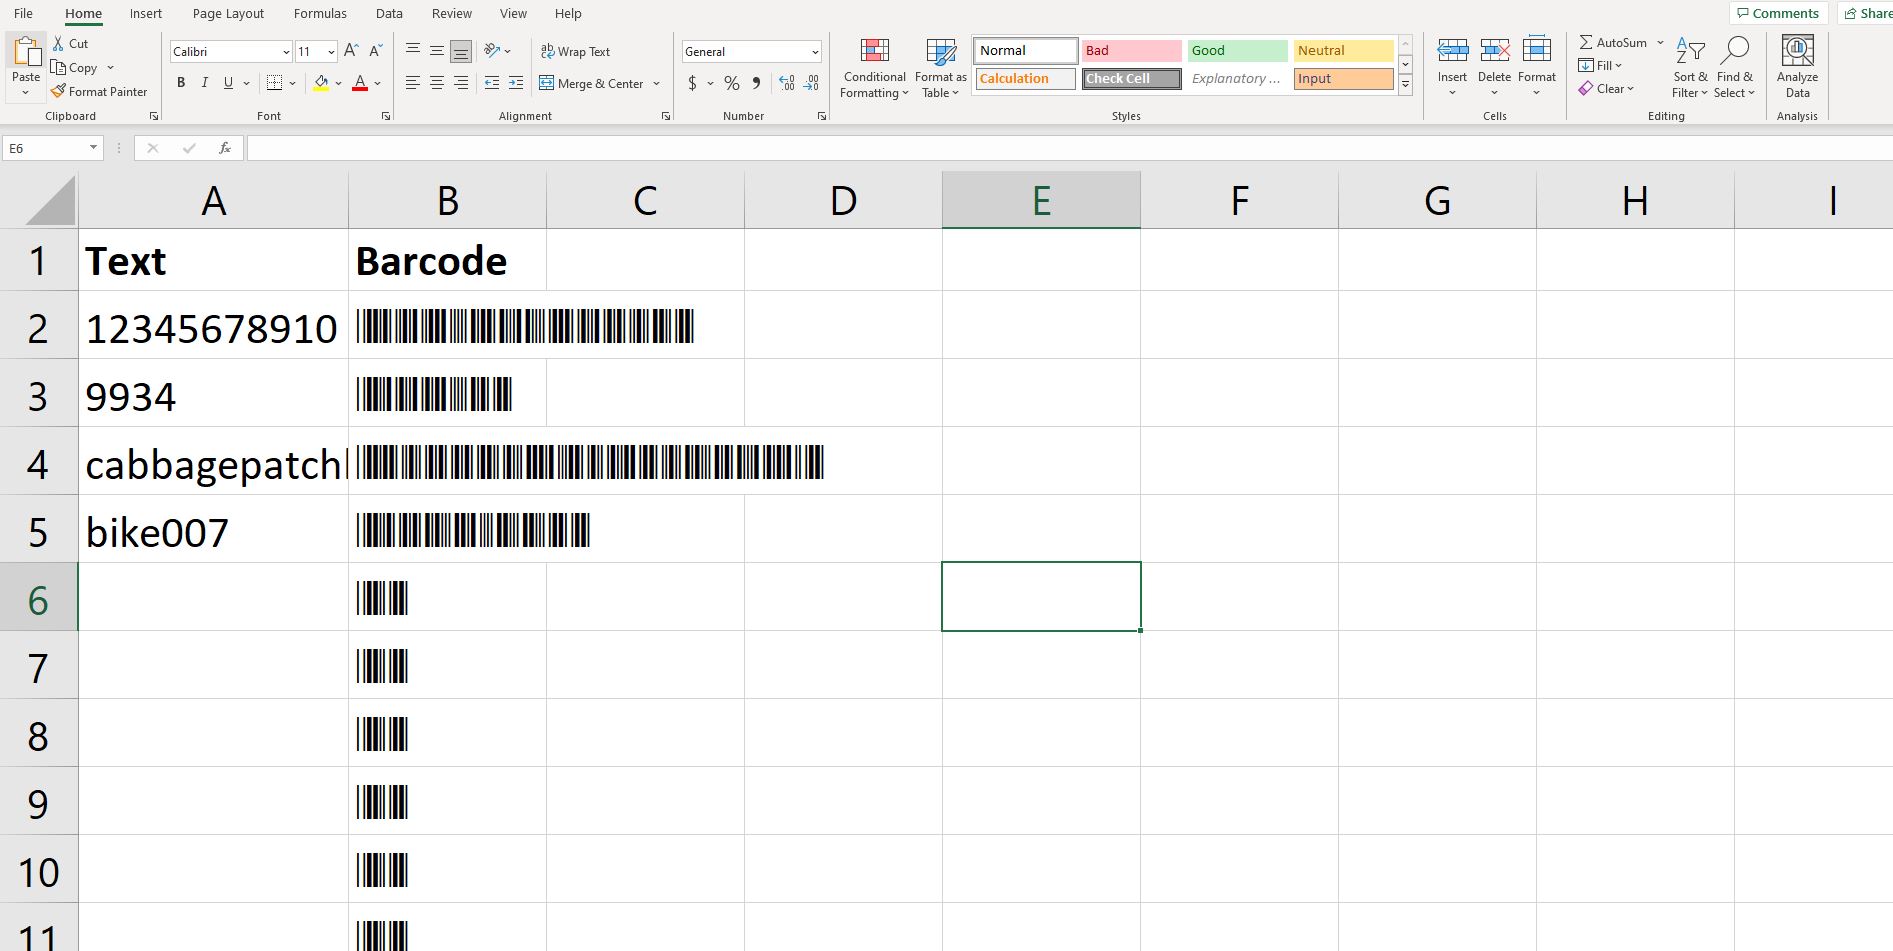 How to create a barcode inventory system in Excel? When scanning a barcode, the encoded data will be displayed on the screen of the device. 